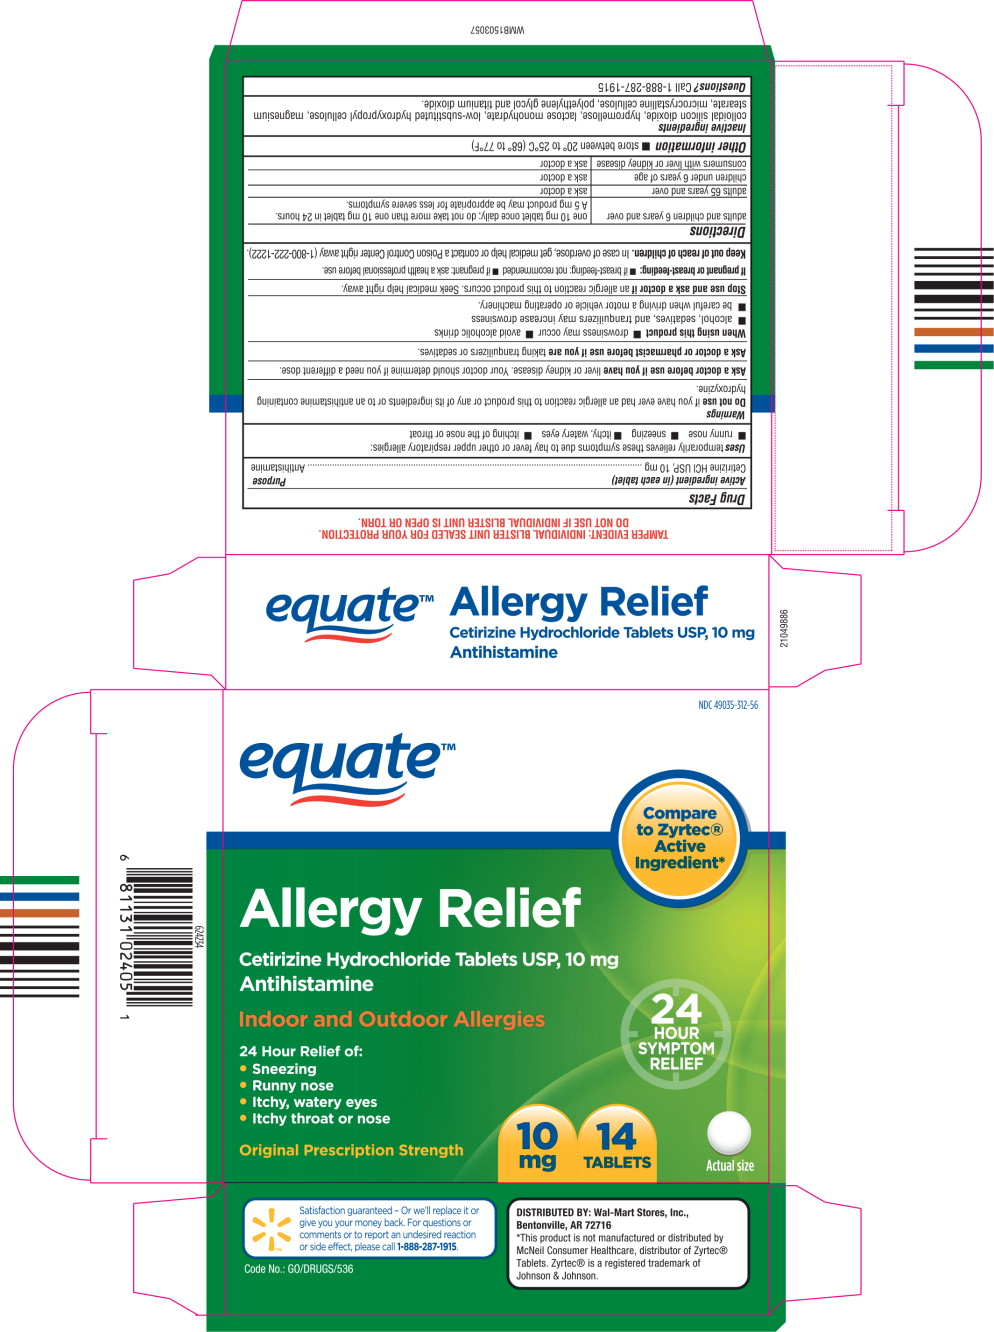 Equate Allergy Relief | Cetirizine Hydrochloride Tablet and breastfeeding